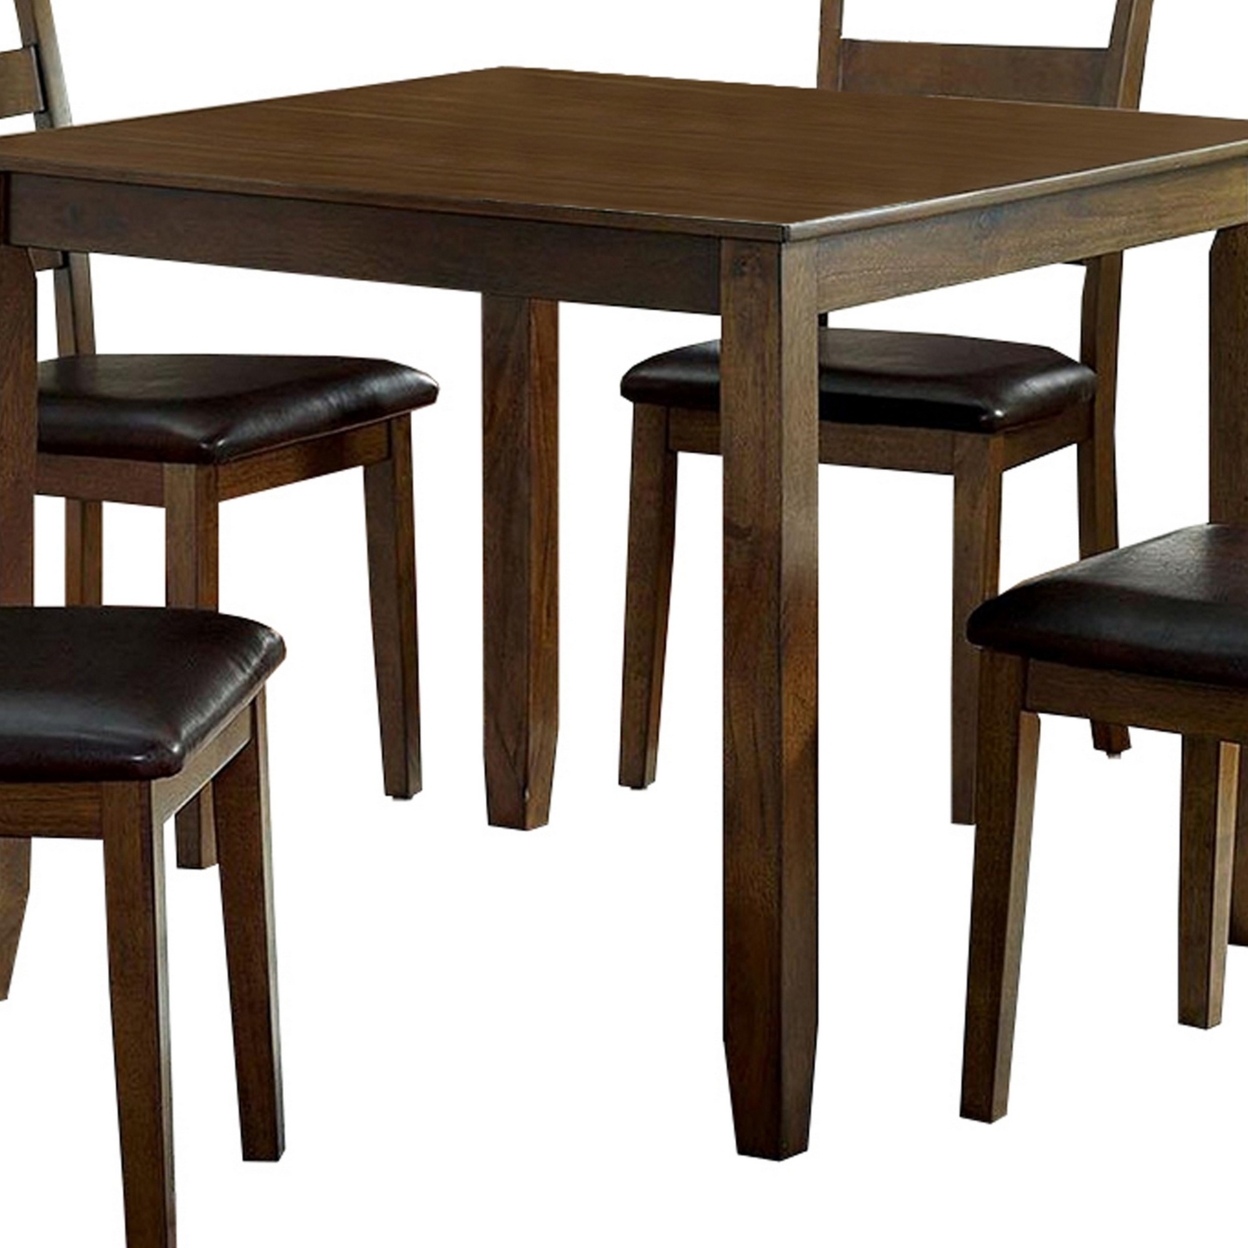 5 Piece Dining Table Set With Leatherette Seating, Brown- Saltoro Sherpi